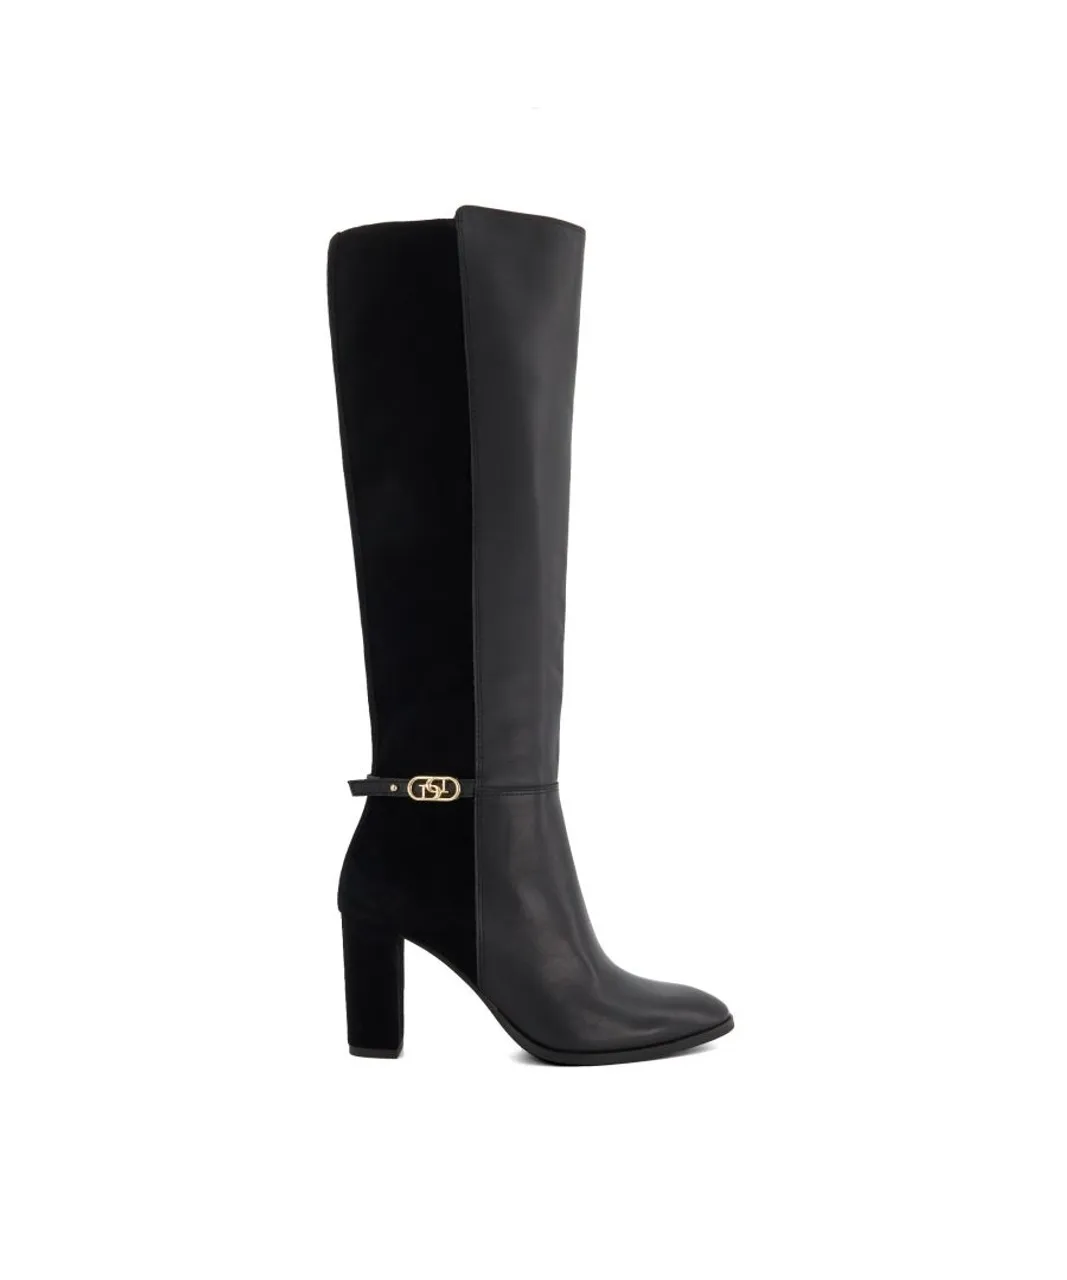 Dune London Womens Ladies Solia - Heeled Knee-High Boots - Black Leather (archived)